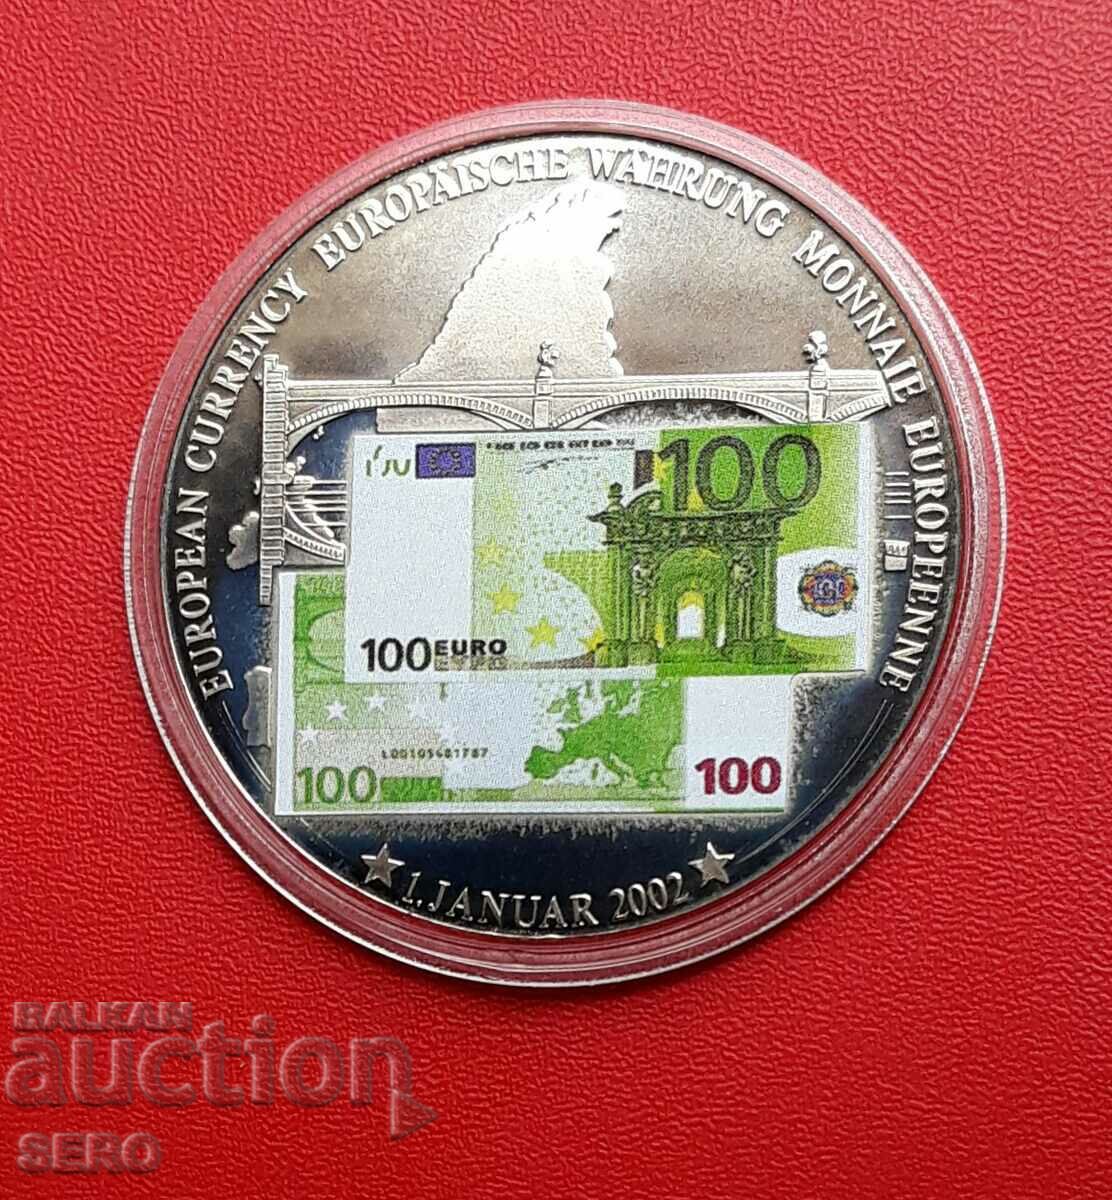 European Union-medal 2002-acceptance of the euro in 12 countries